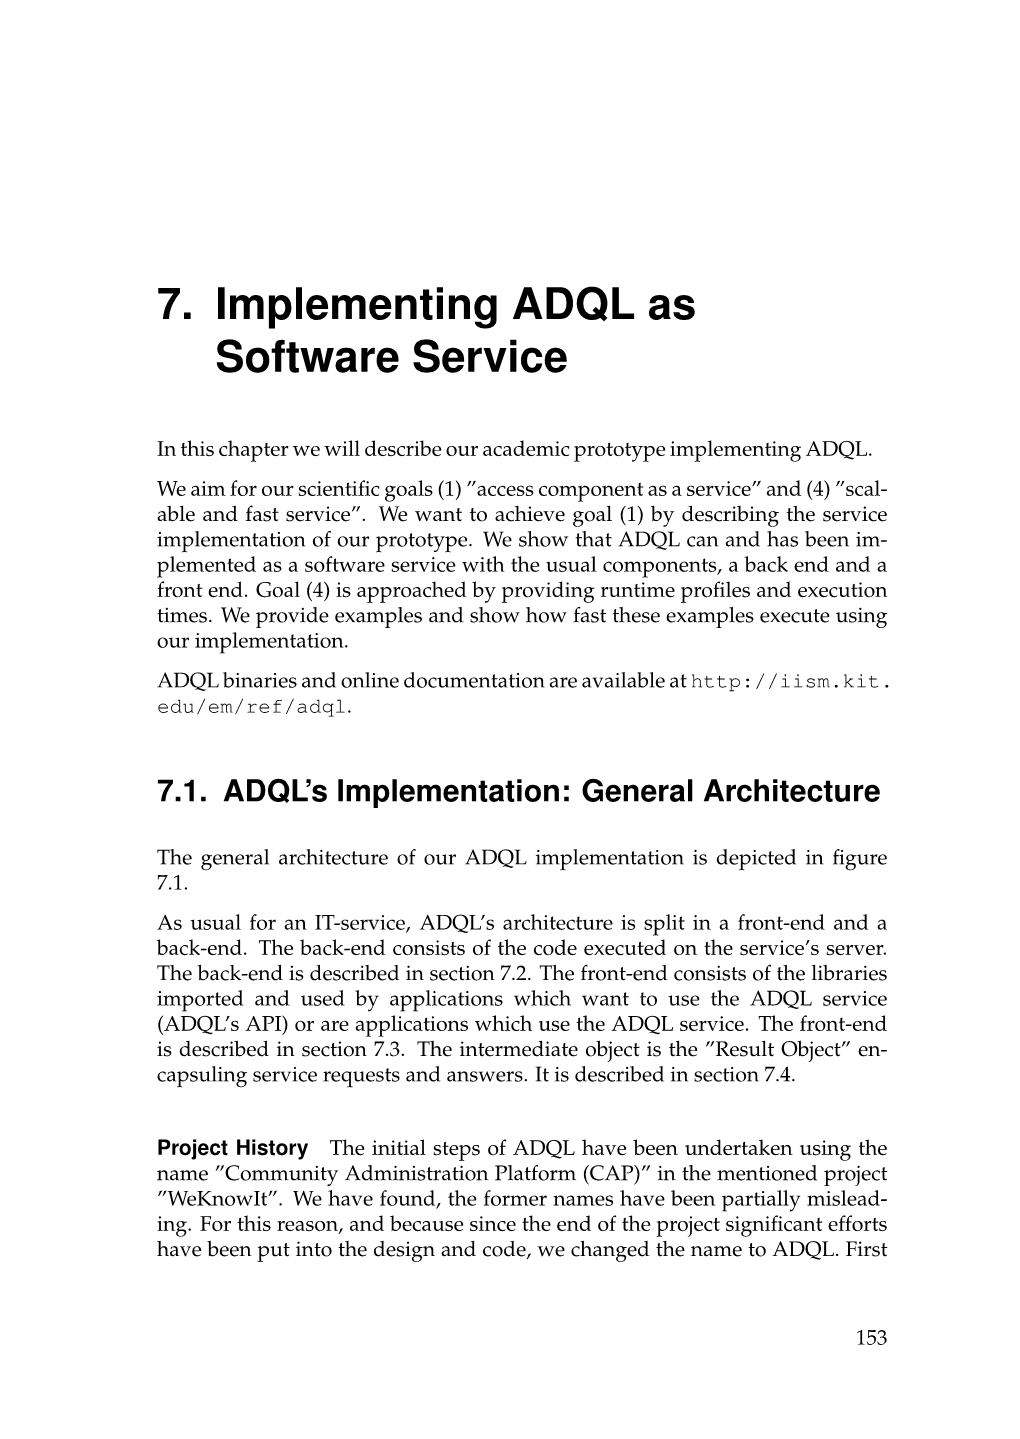 7. Implementing ADQL As Software Service